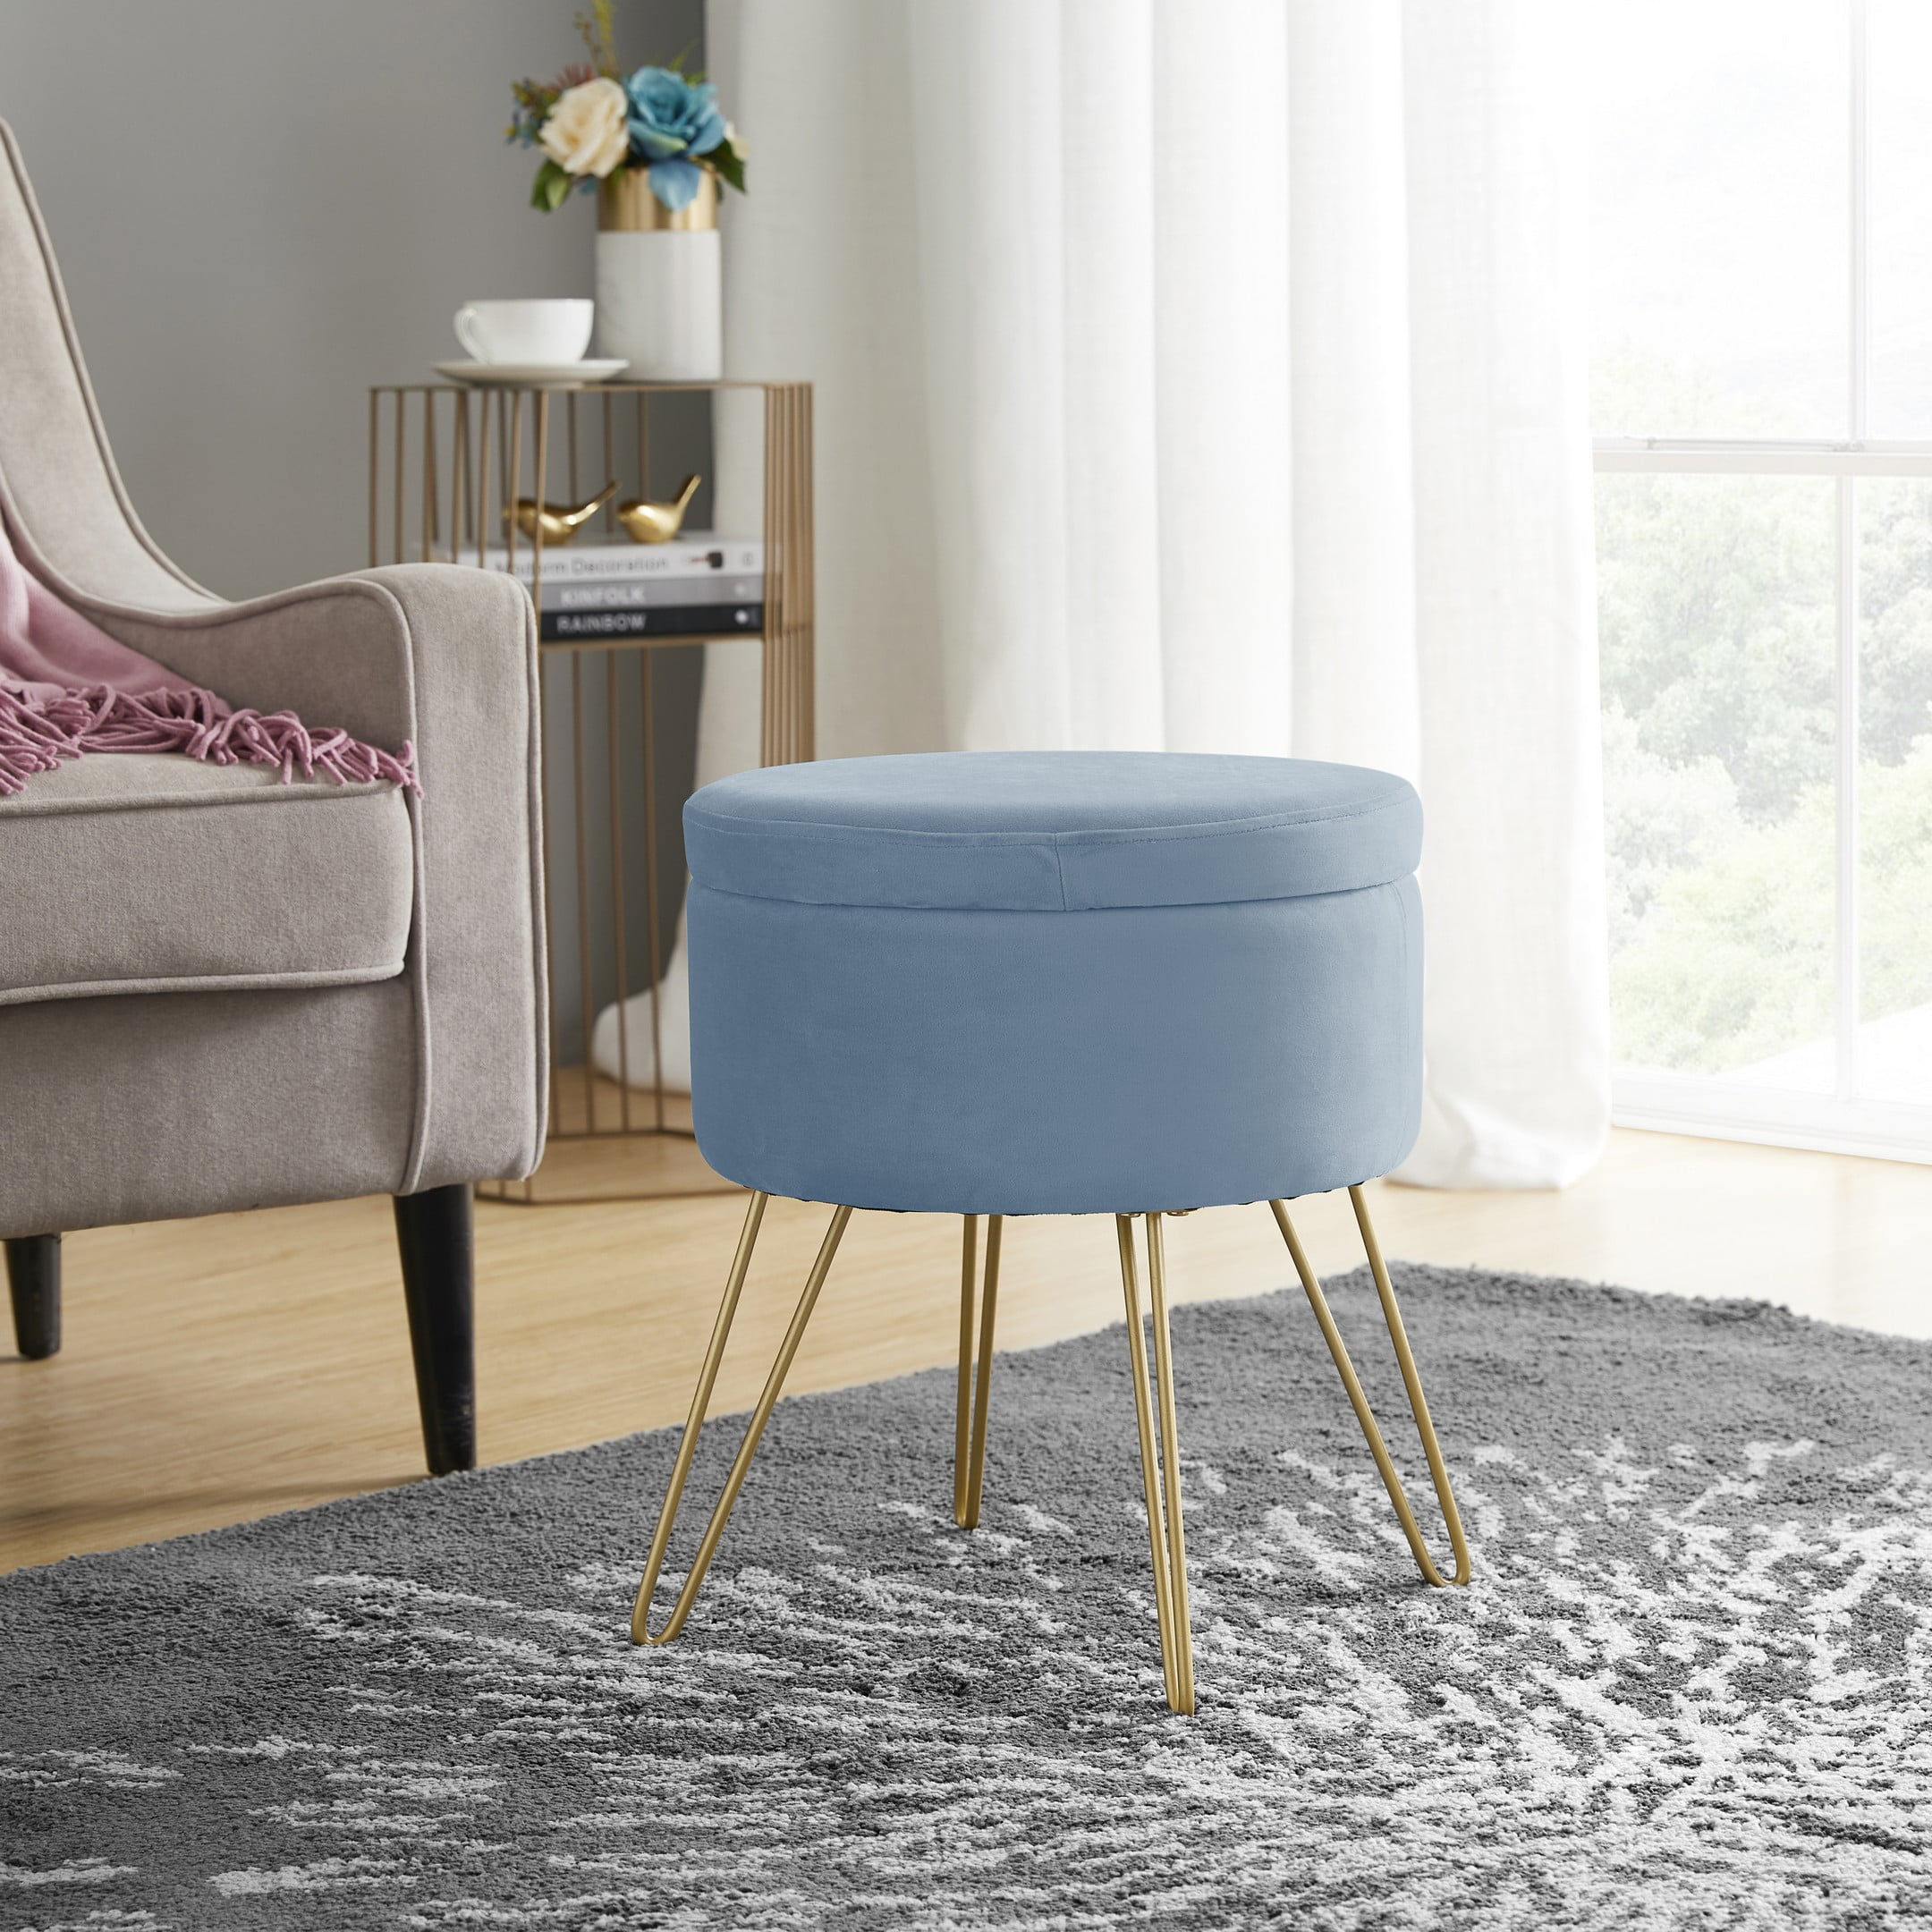 Silver Grey, Large Velvet Upholstered Footrest Stool Ottoman with Gold Metal Round Base Apply Living Room Bedroom Home Office Round Storage Ottoman